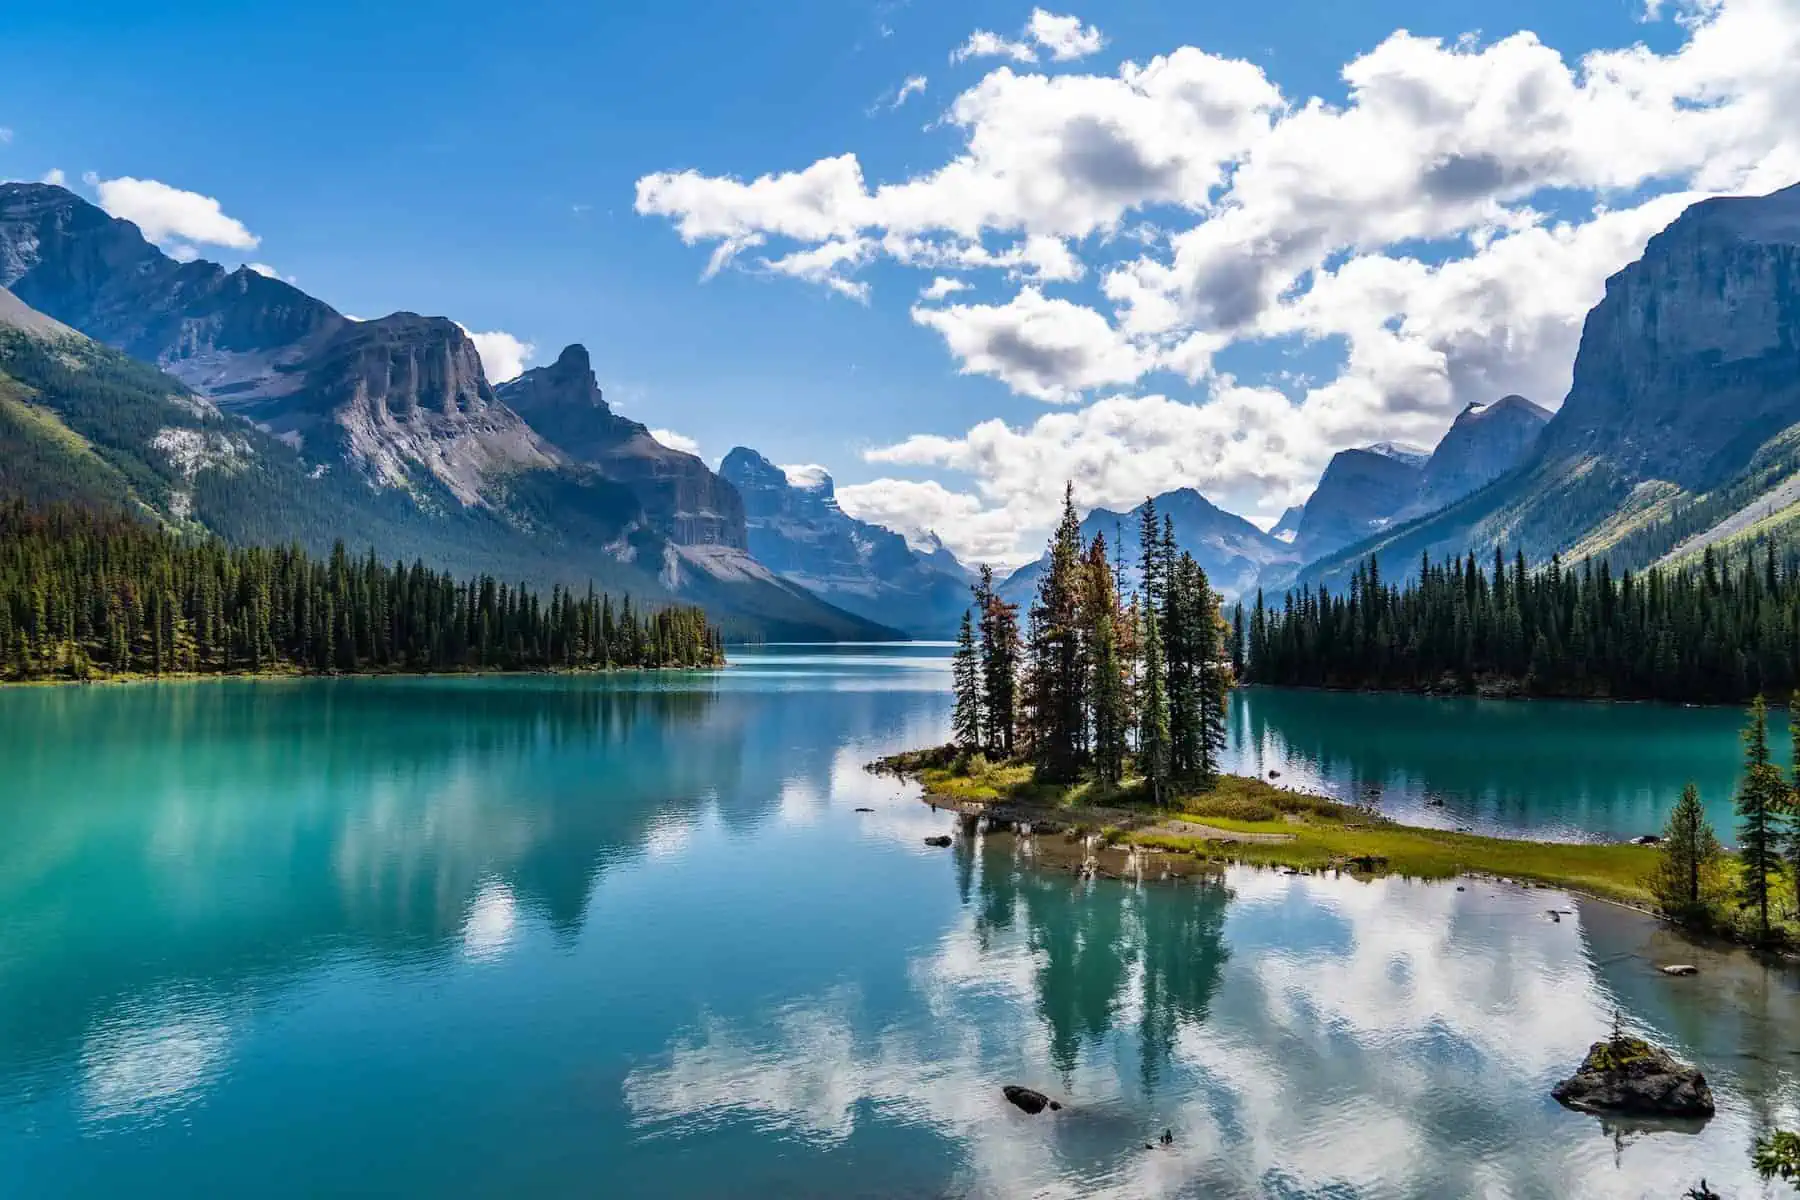 View of mountains, water and trees on Maligne Lake in Jasper, Alberta